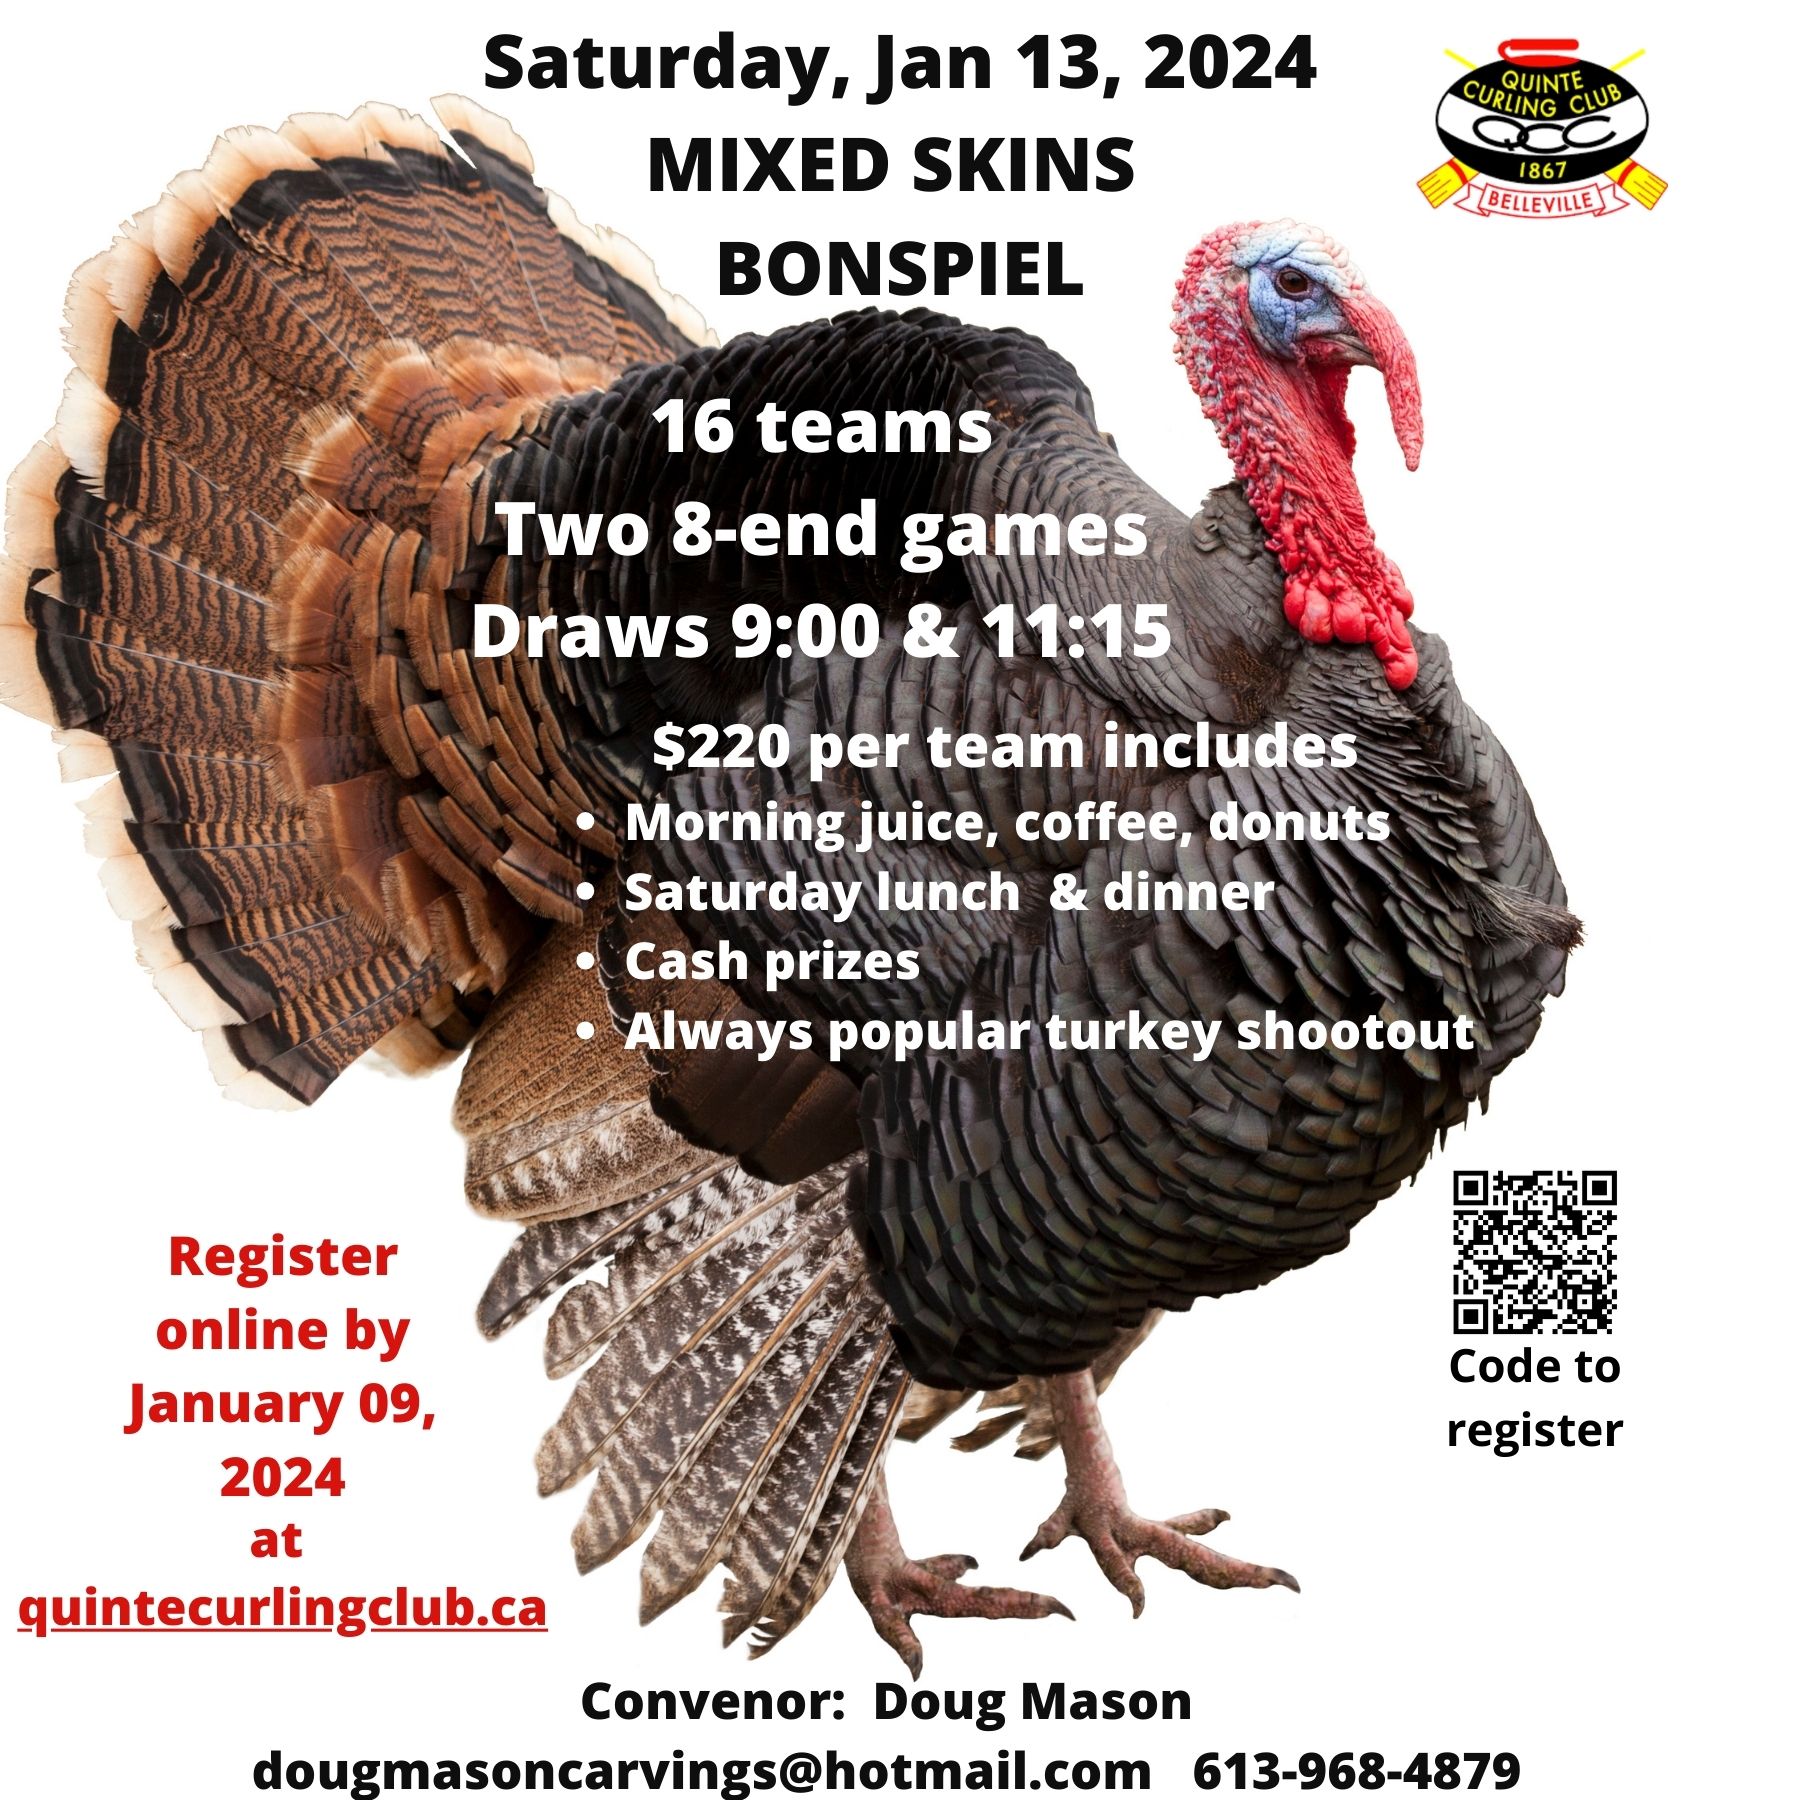 event poster showing a picture of a turkey and event details